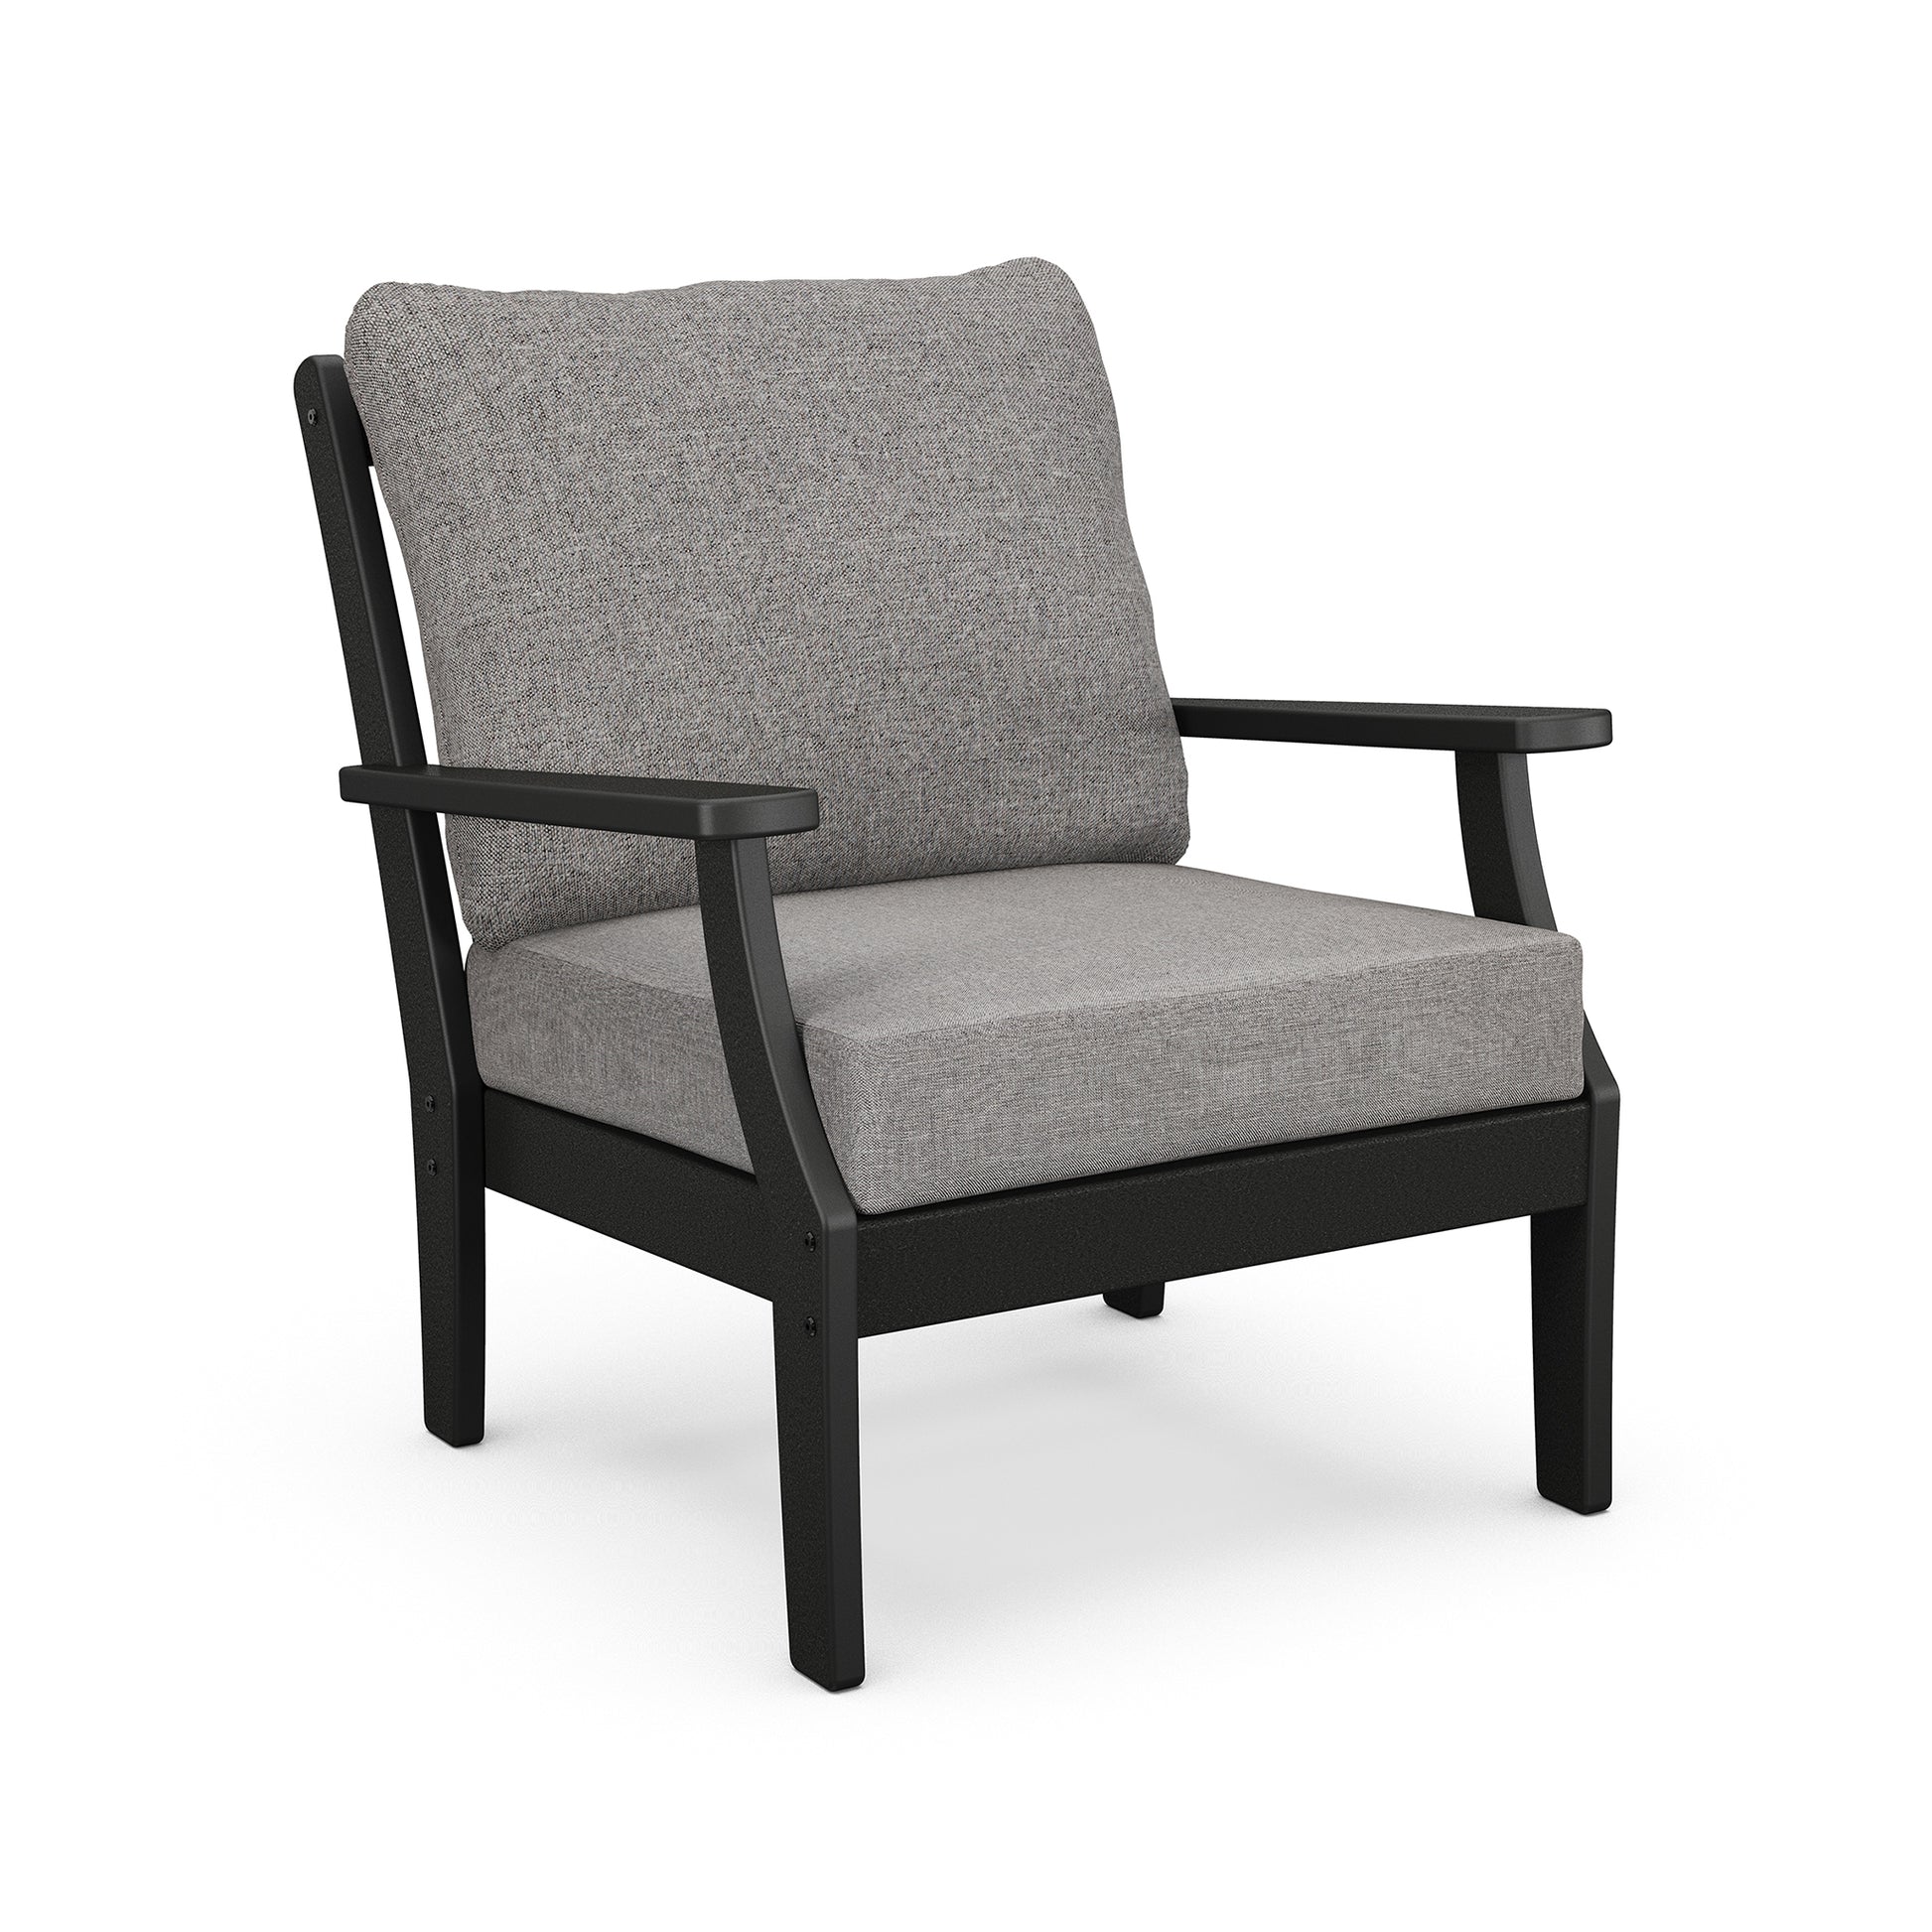 A modern POLYWOOD® Braxton Deep Seating Chair with a black frame and light gray cushions, viewed at a slight angle against a white background.